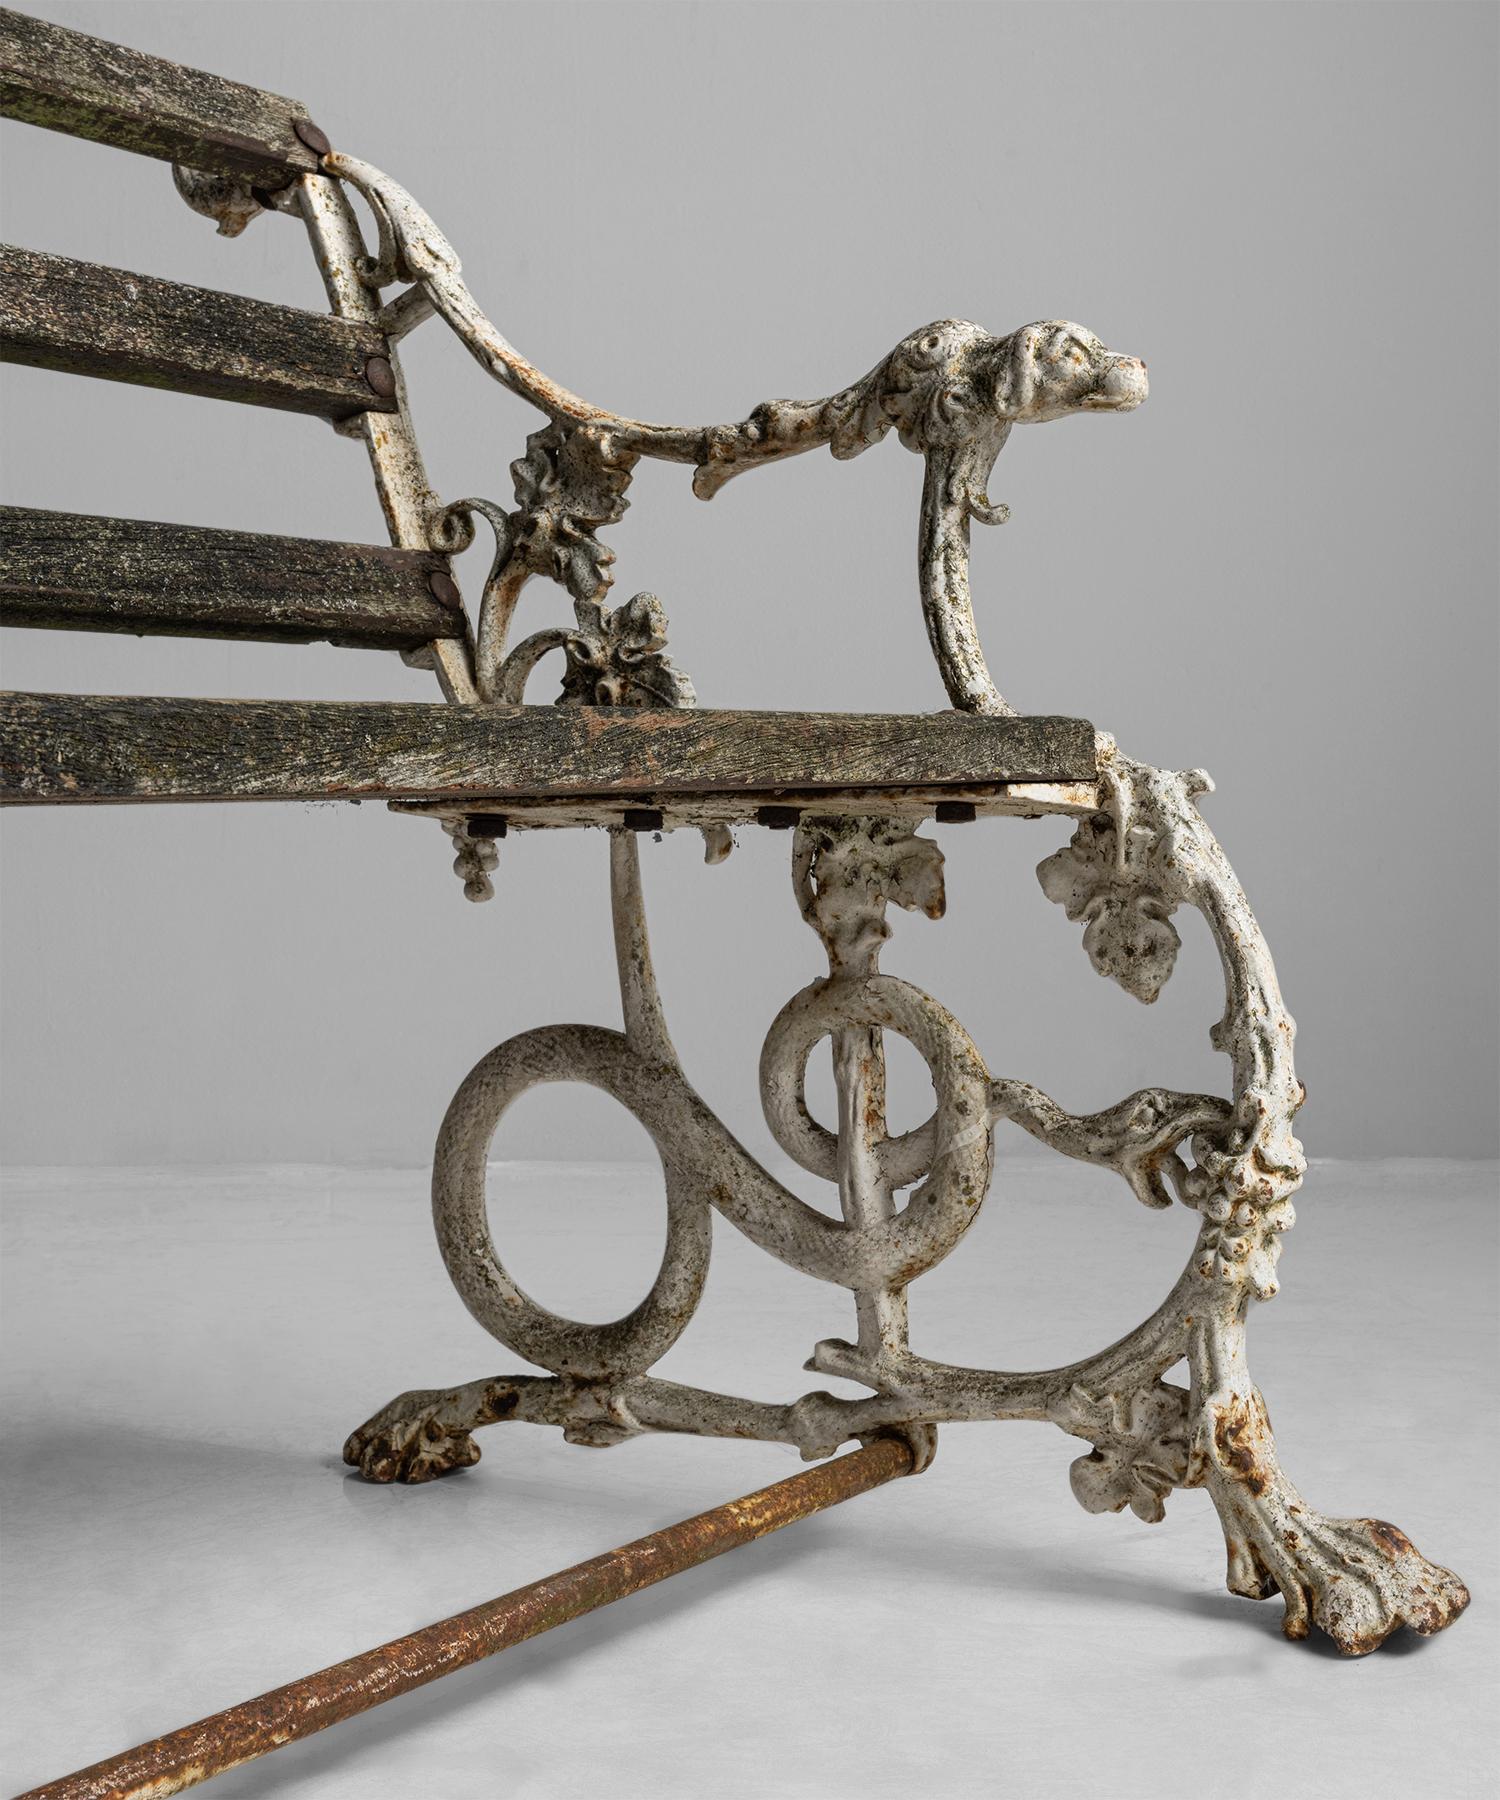 Dog & Serpent Garden bench

England, Circa 1920

Garden bench with painted iron framework with serpents on the base, and dog armrests.